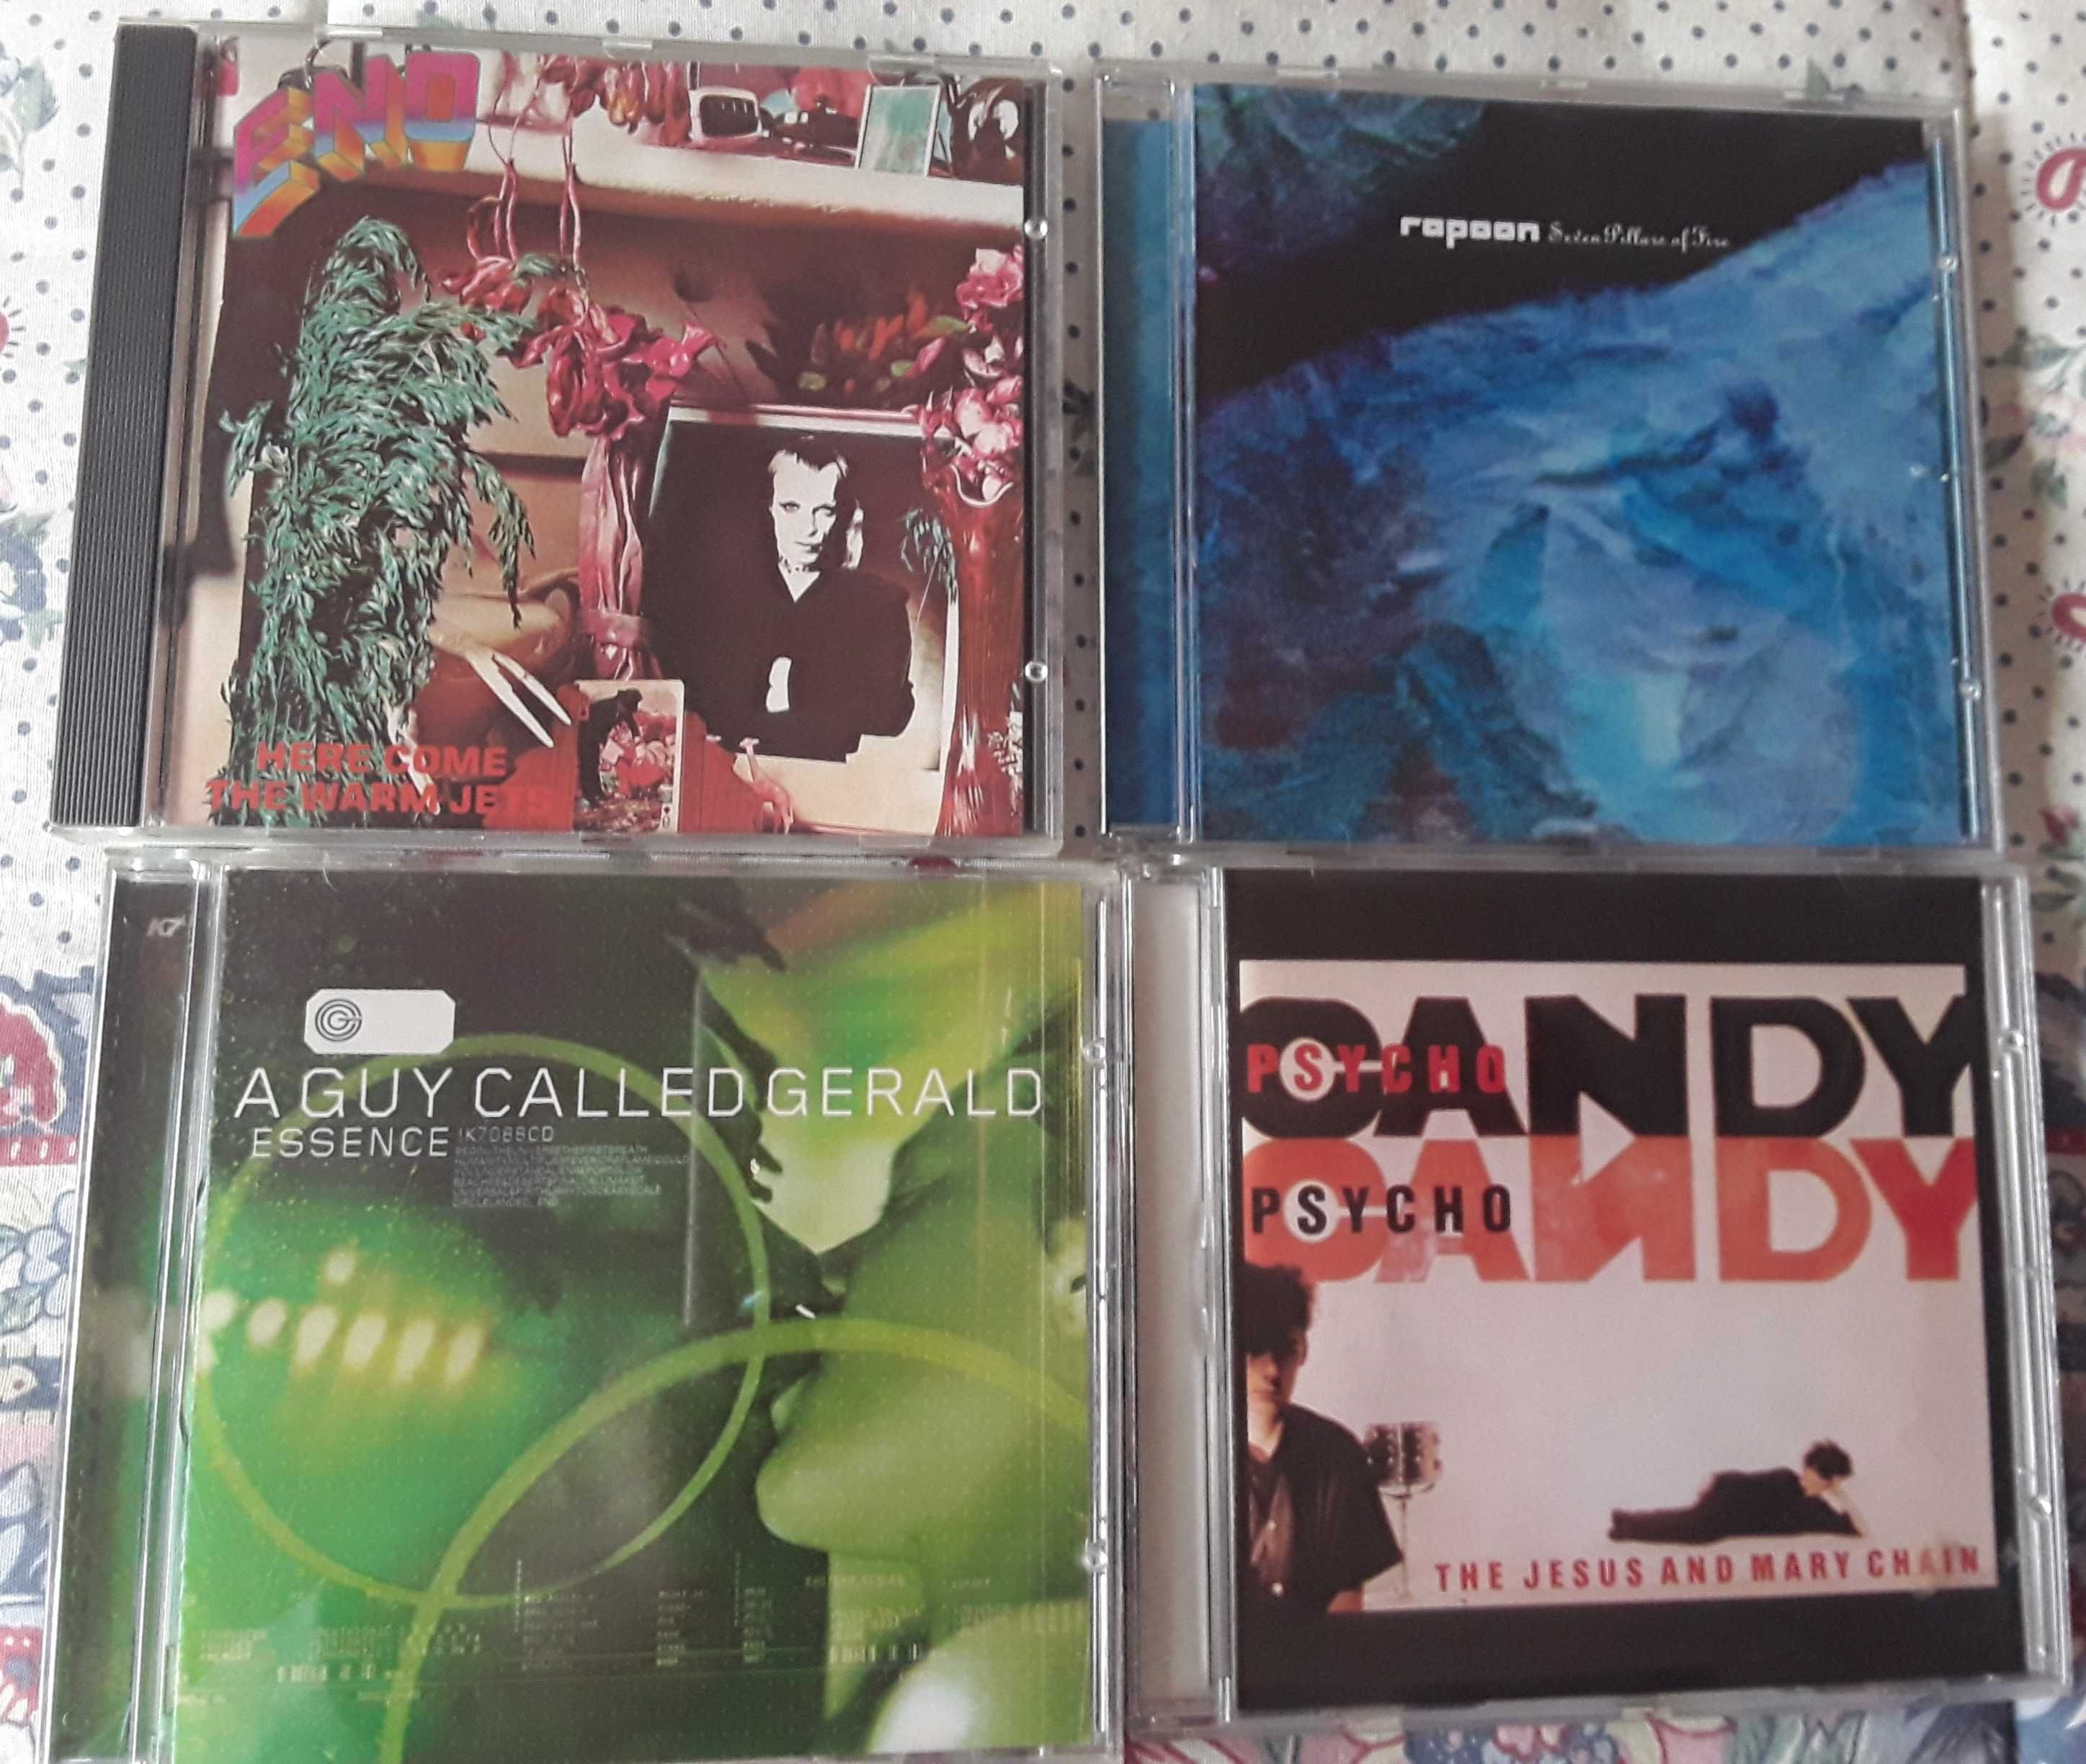 Vendo 7 cd's dos The Cure, New Order, Cocteau Twins...